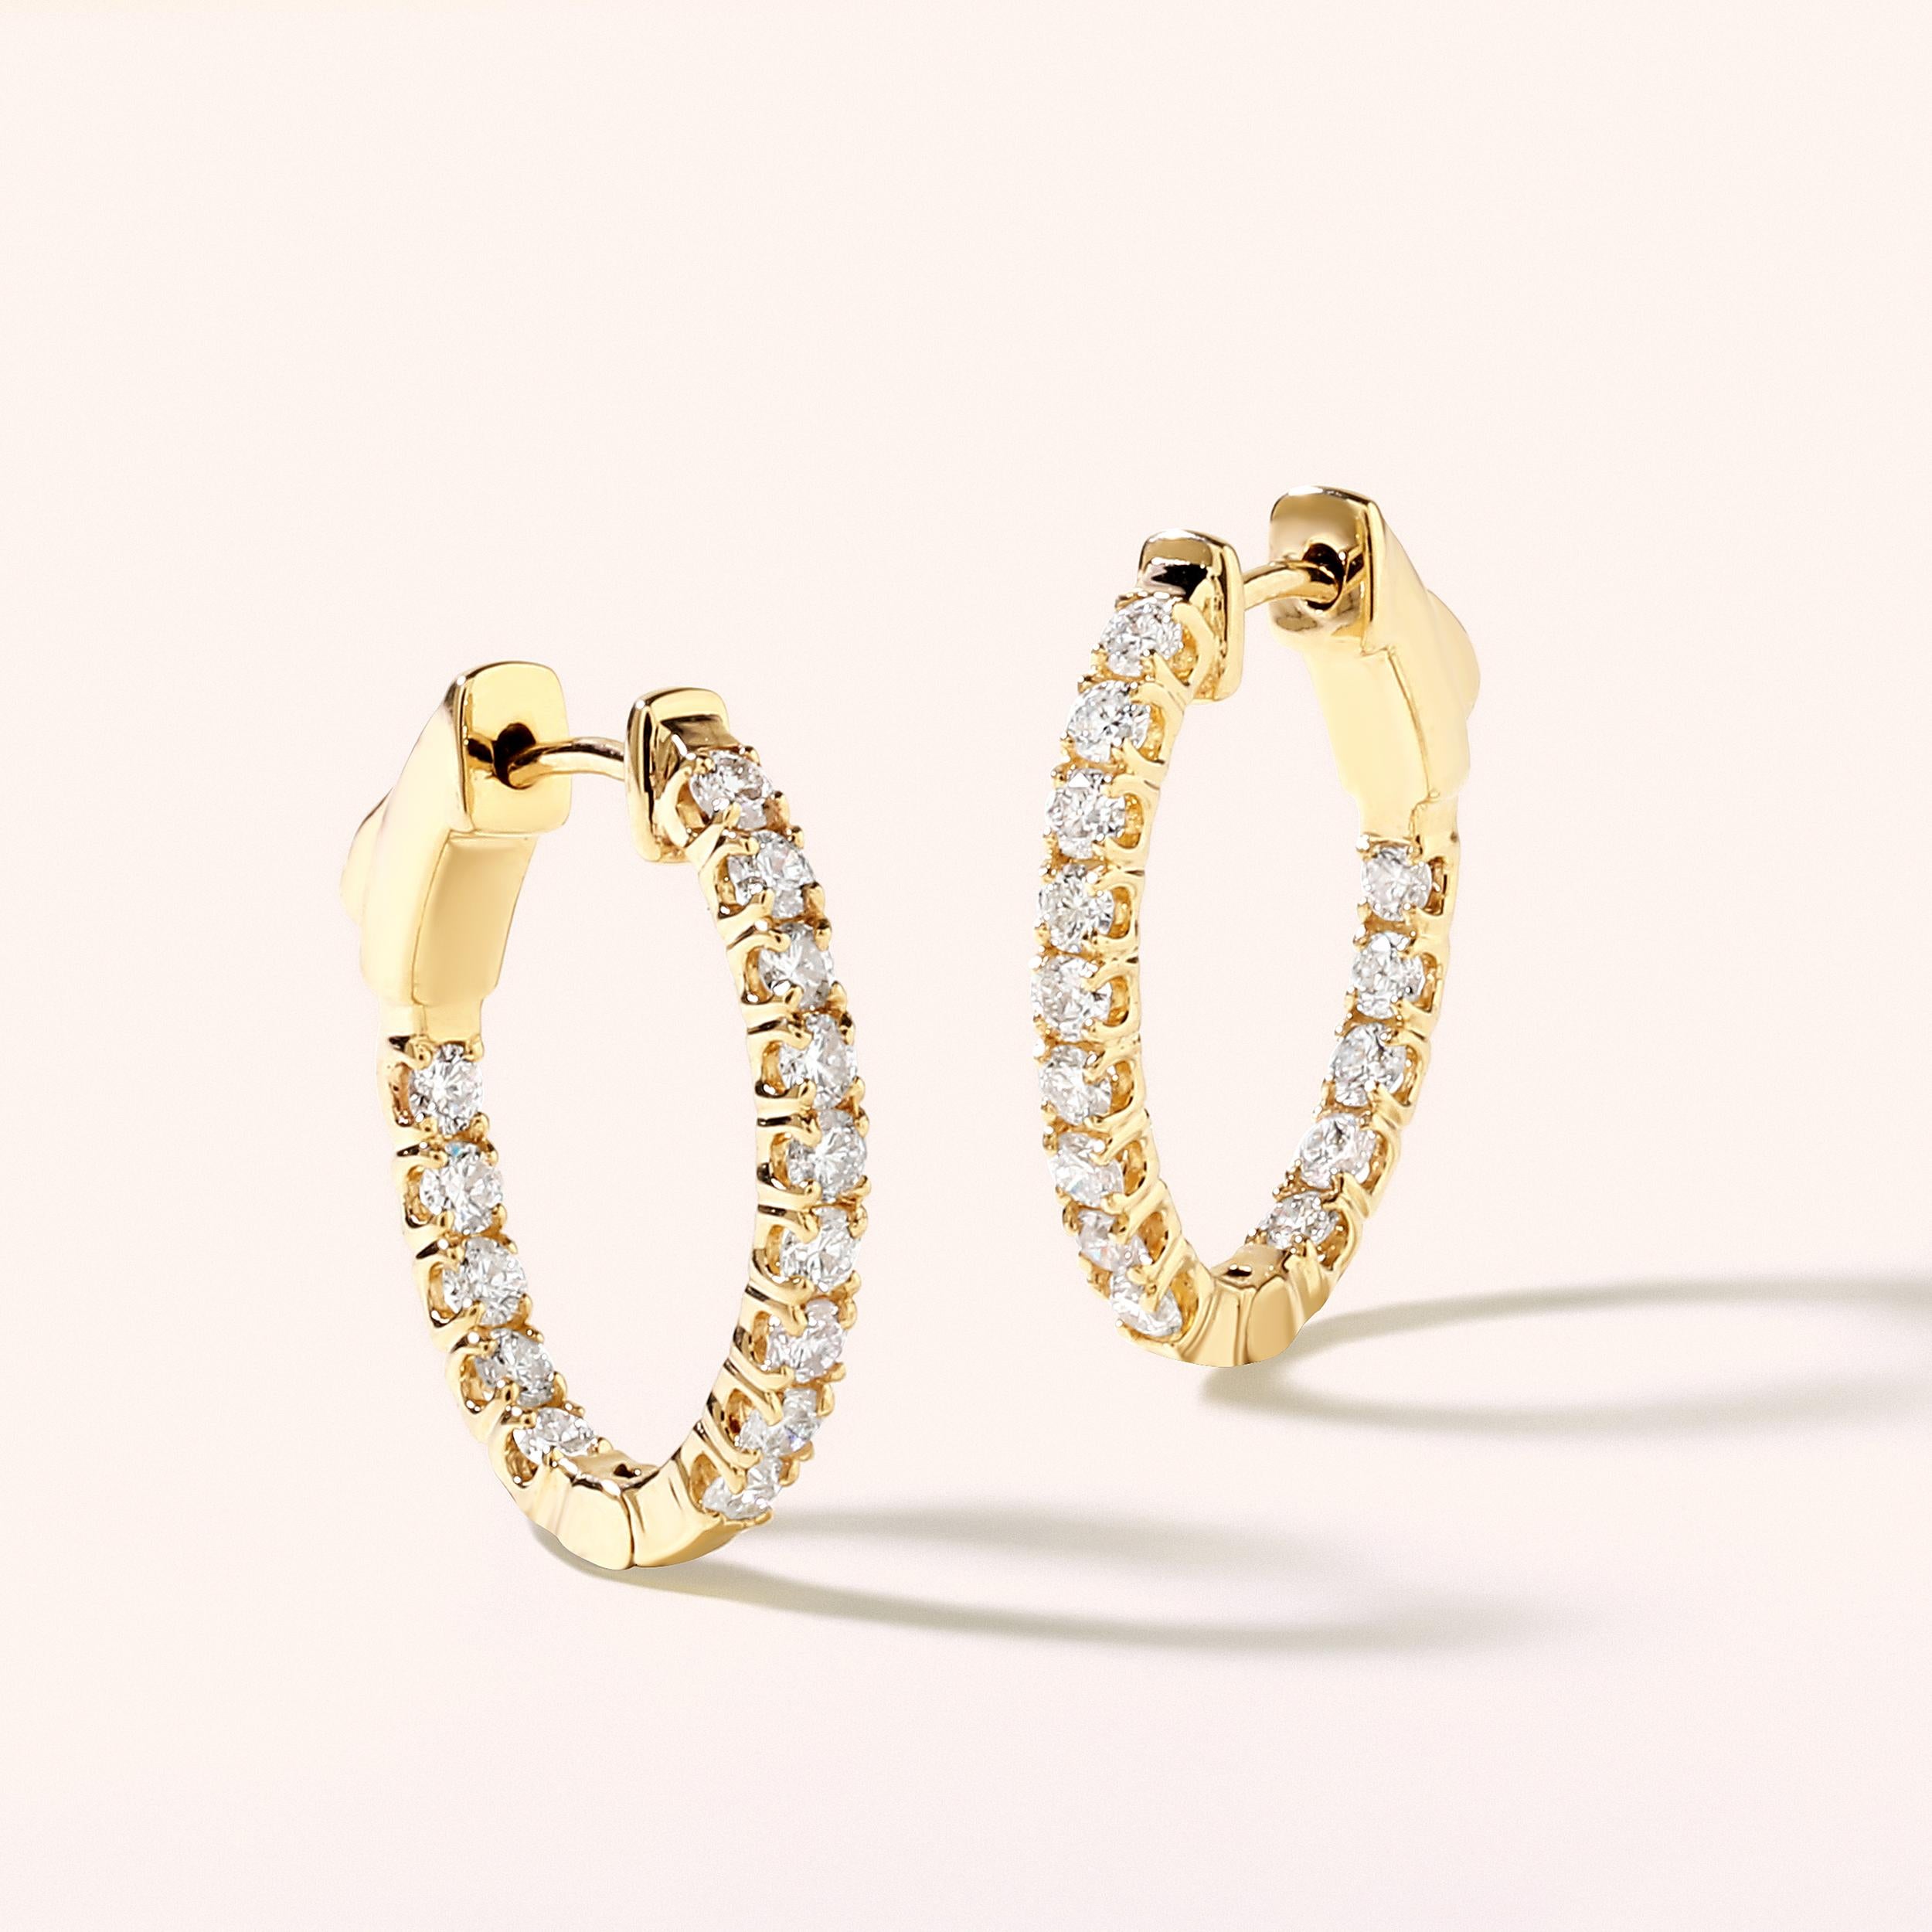 Crafted in 3.75 grams of 14K Yellow Gold, the earrings contains 28 stones of Round Diamonds with a total of 0.97 carat in F-G color and SI clarity.

CONTEMPORARY AND TIMELESS ESSENCE: Crafted in 14-karat/18-karat with 100% natural diamond and